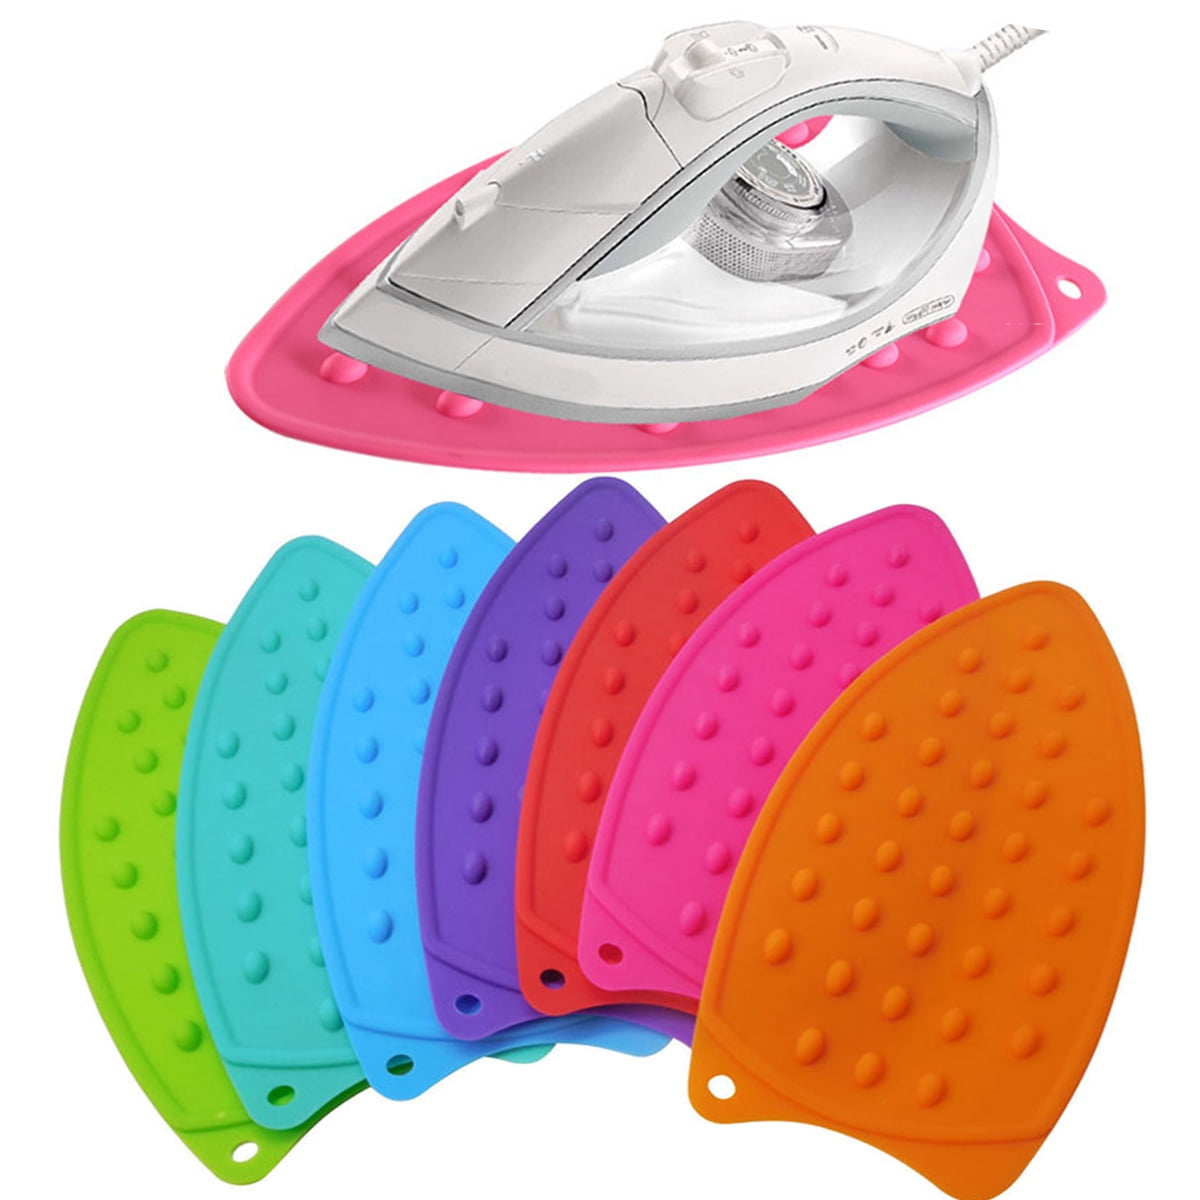 Silicone Iron Rest Pad Heat Resistant Ironing Board Protector Mat Hot Safety 